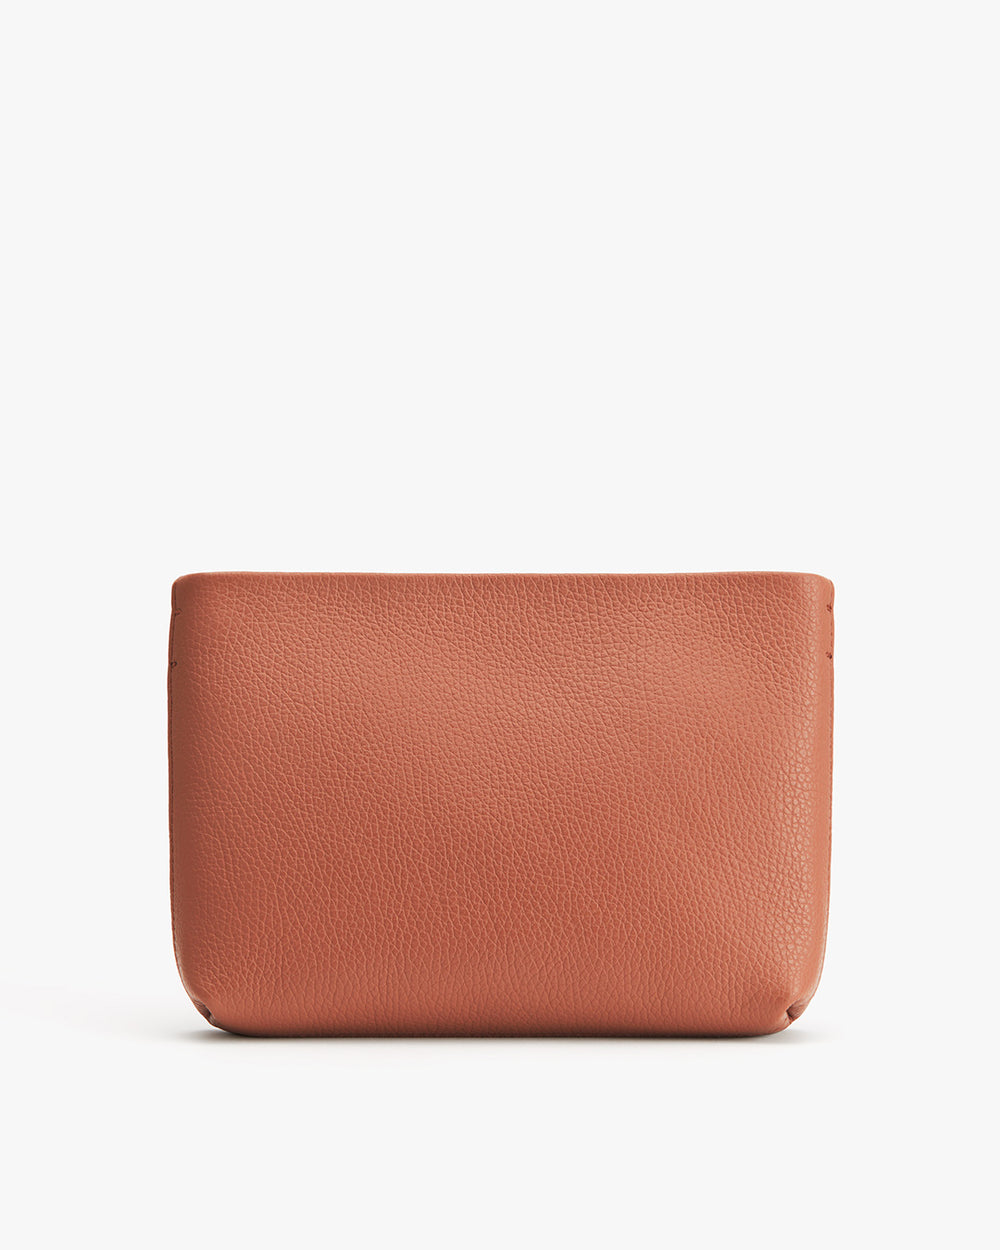 Small textured pouch standing upright on plain background